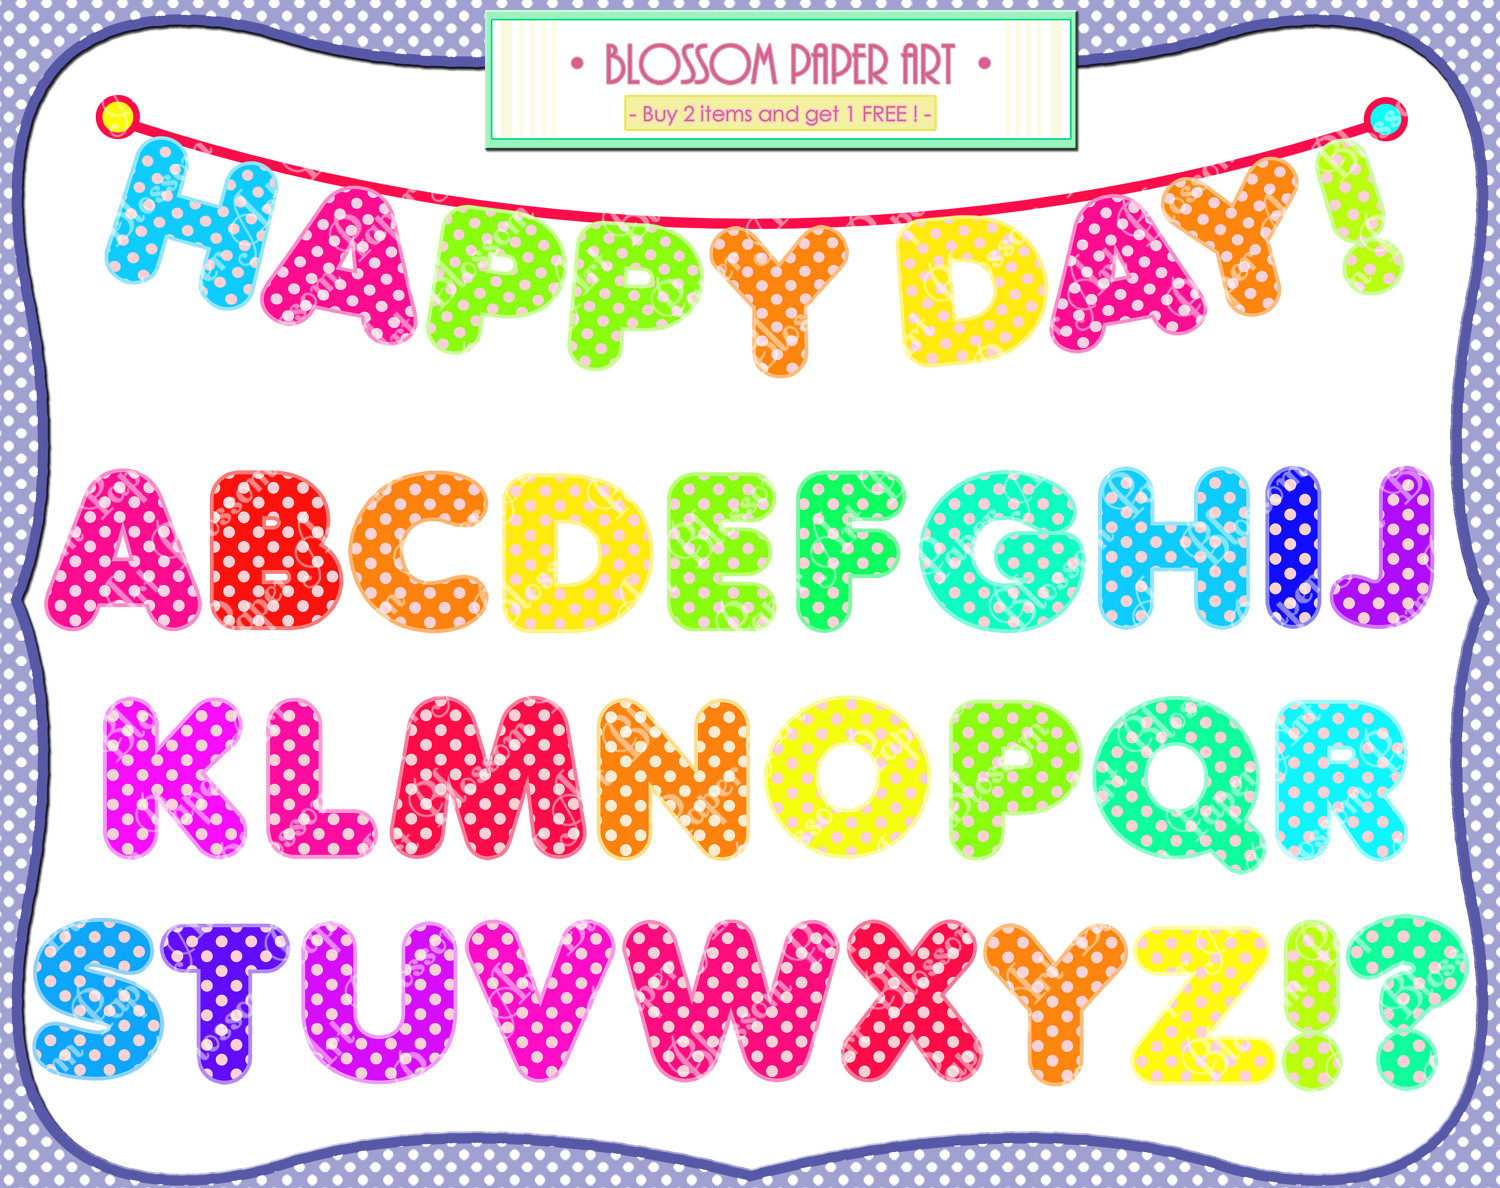 Free Printable Alphabet Cliparts, Download Free Printable Alphabet